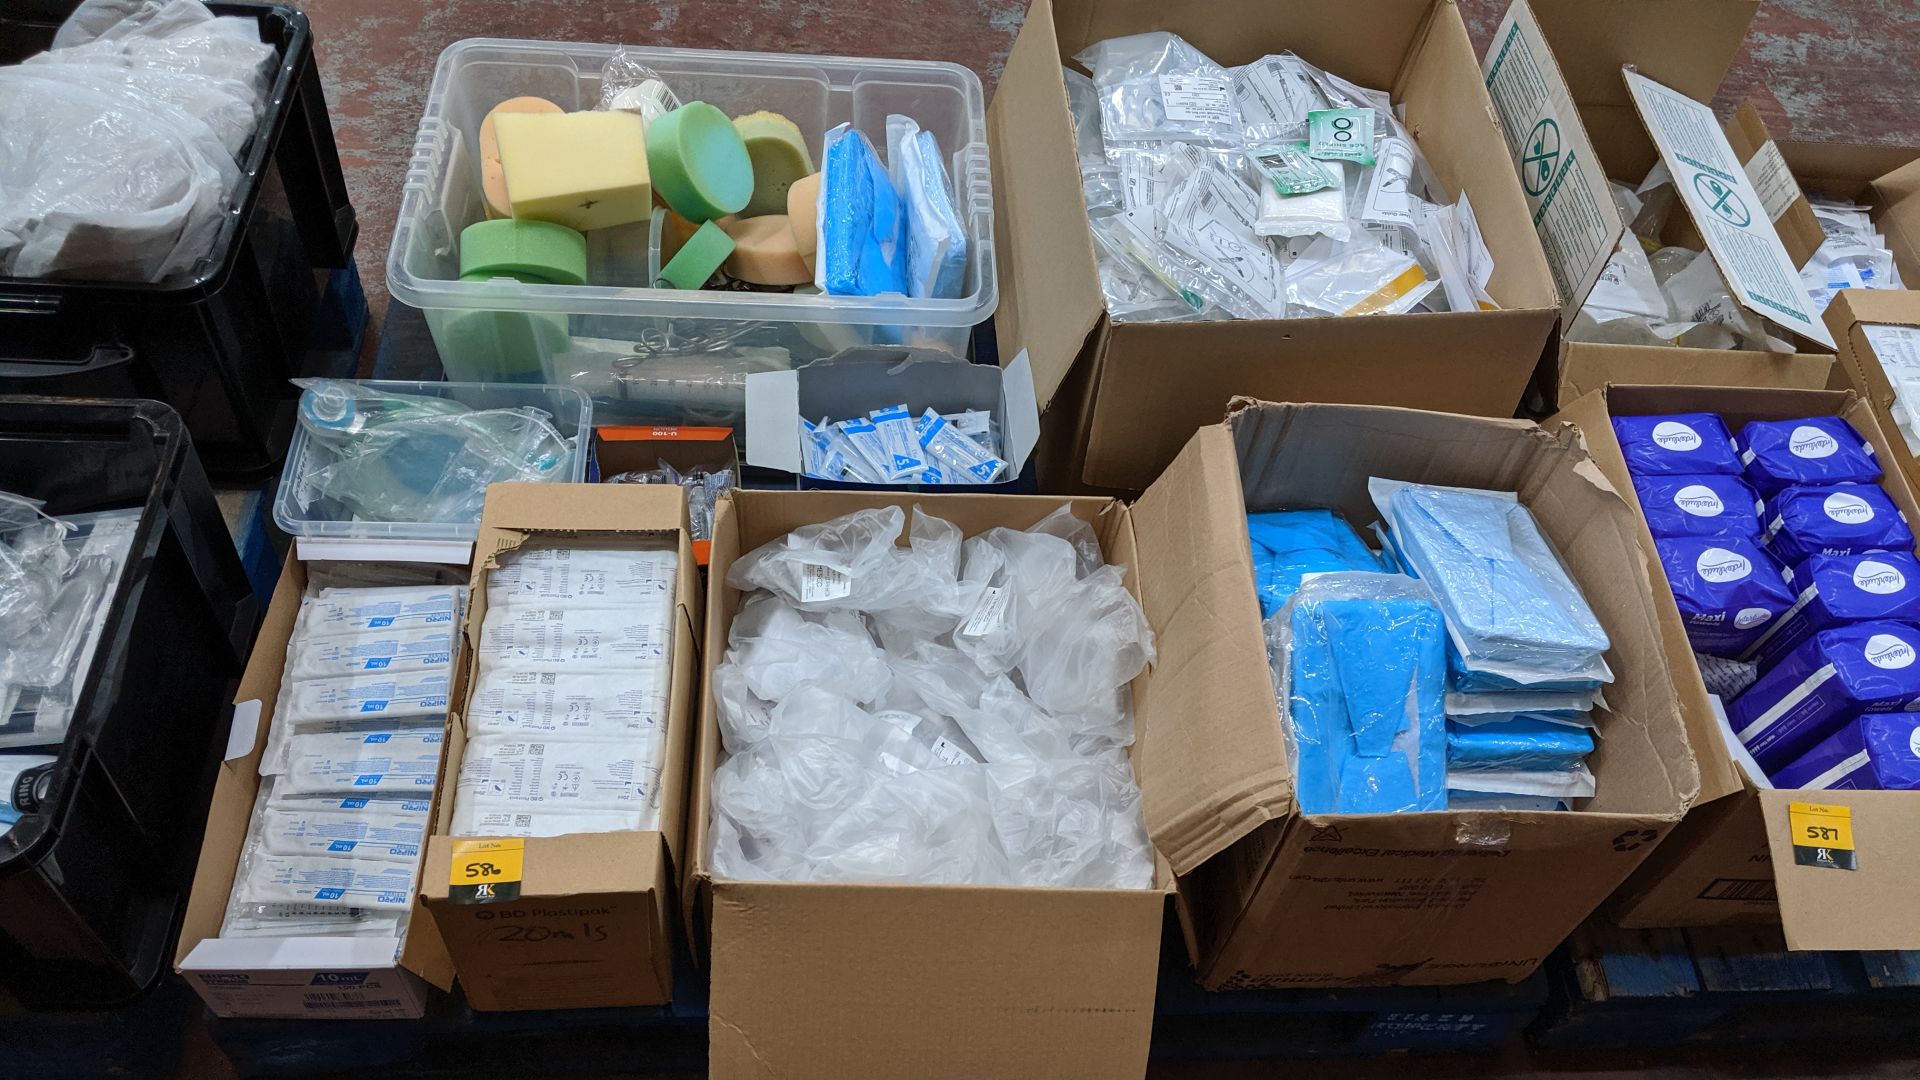 Contents of a pallet of medical supplies NB Pallet excluded. This is one of a large number of lots